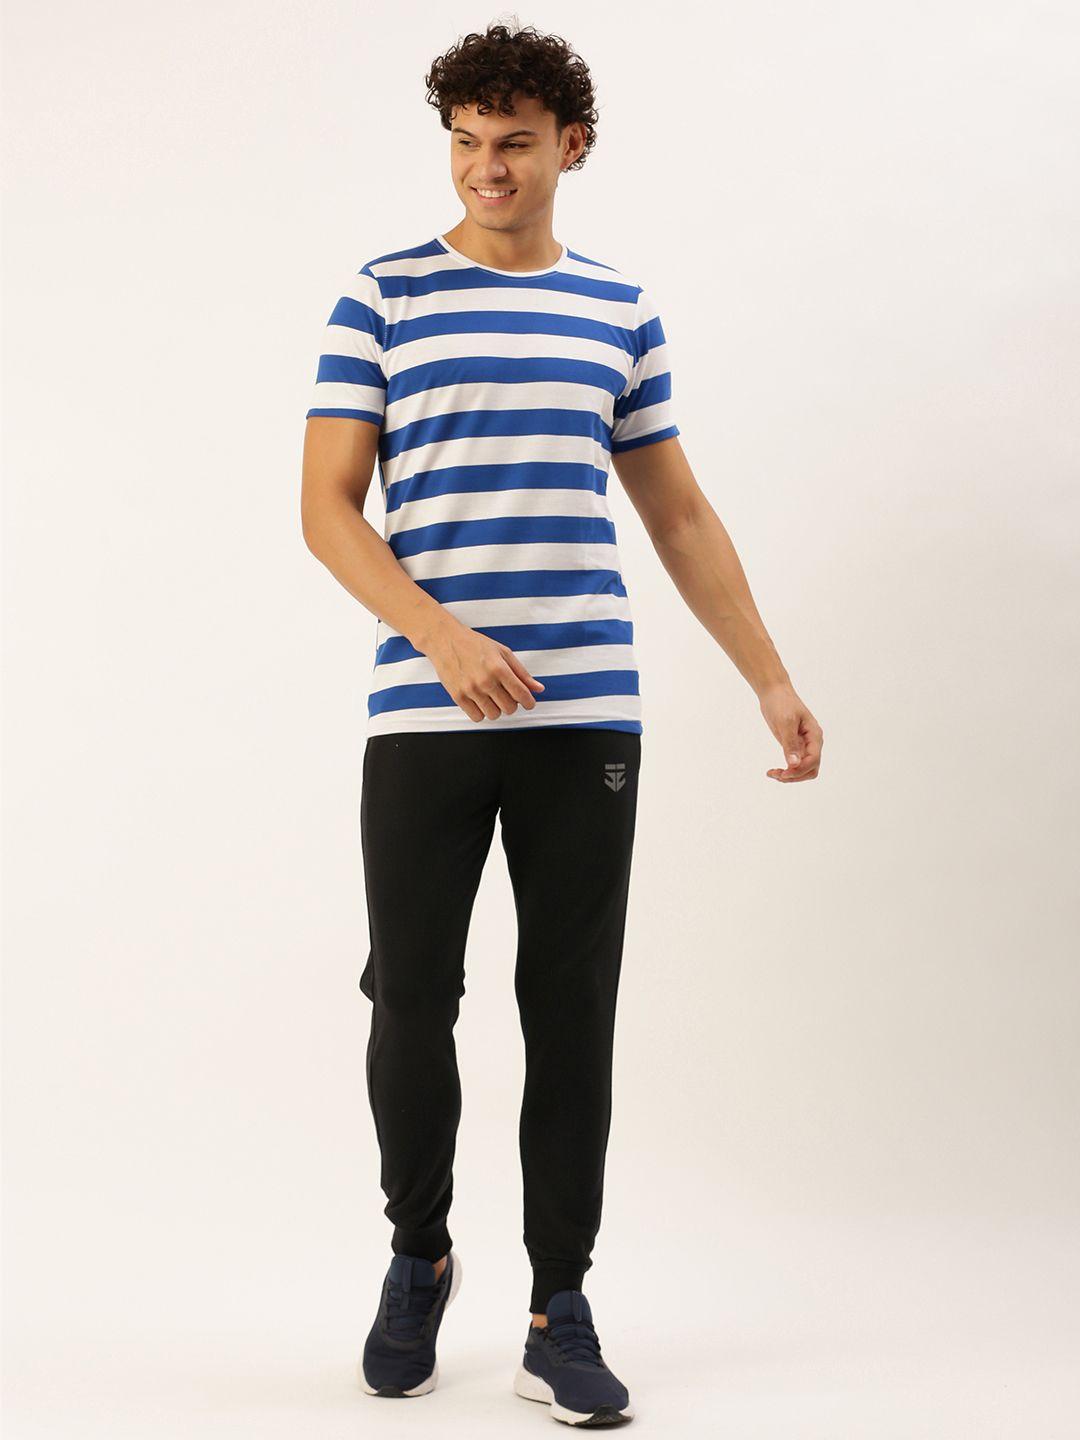 sports52 wear men striped t-shirt and mid-rise jogger training tracksuit